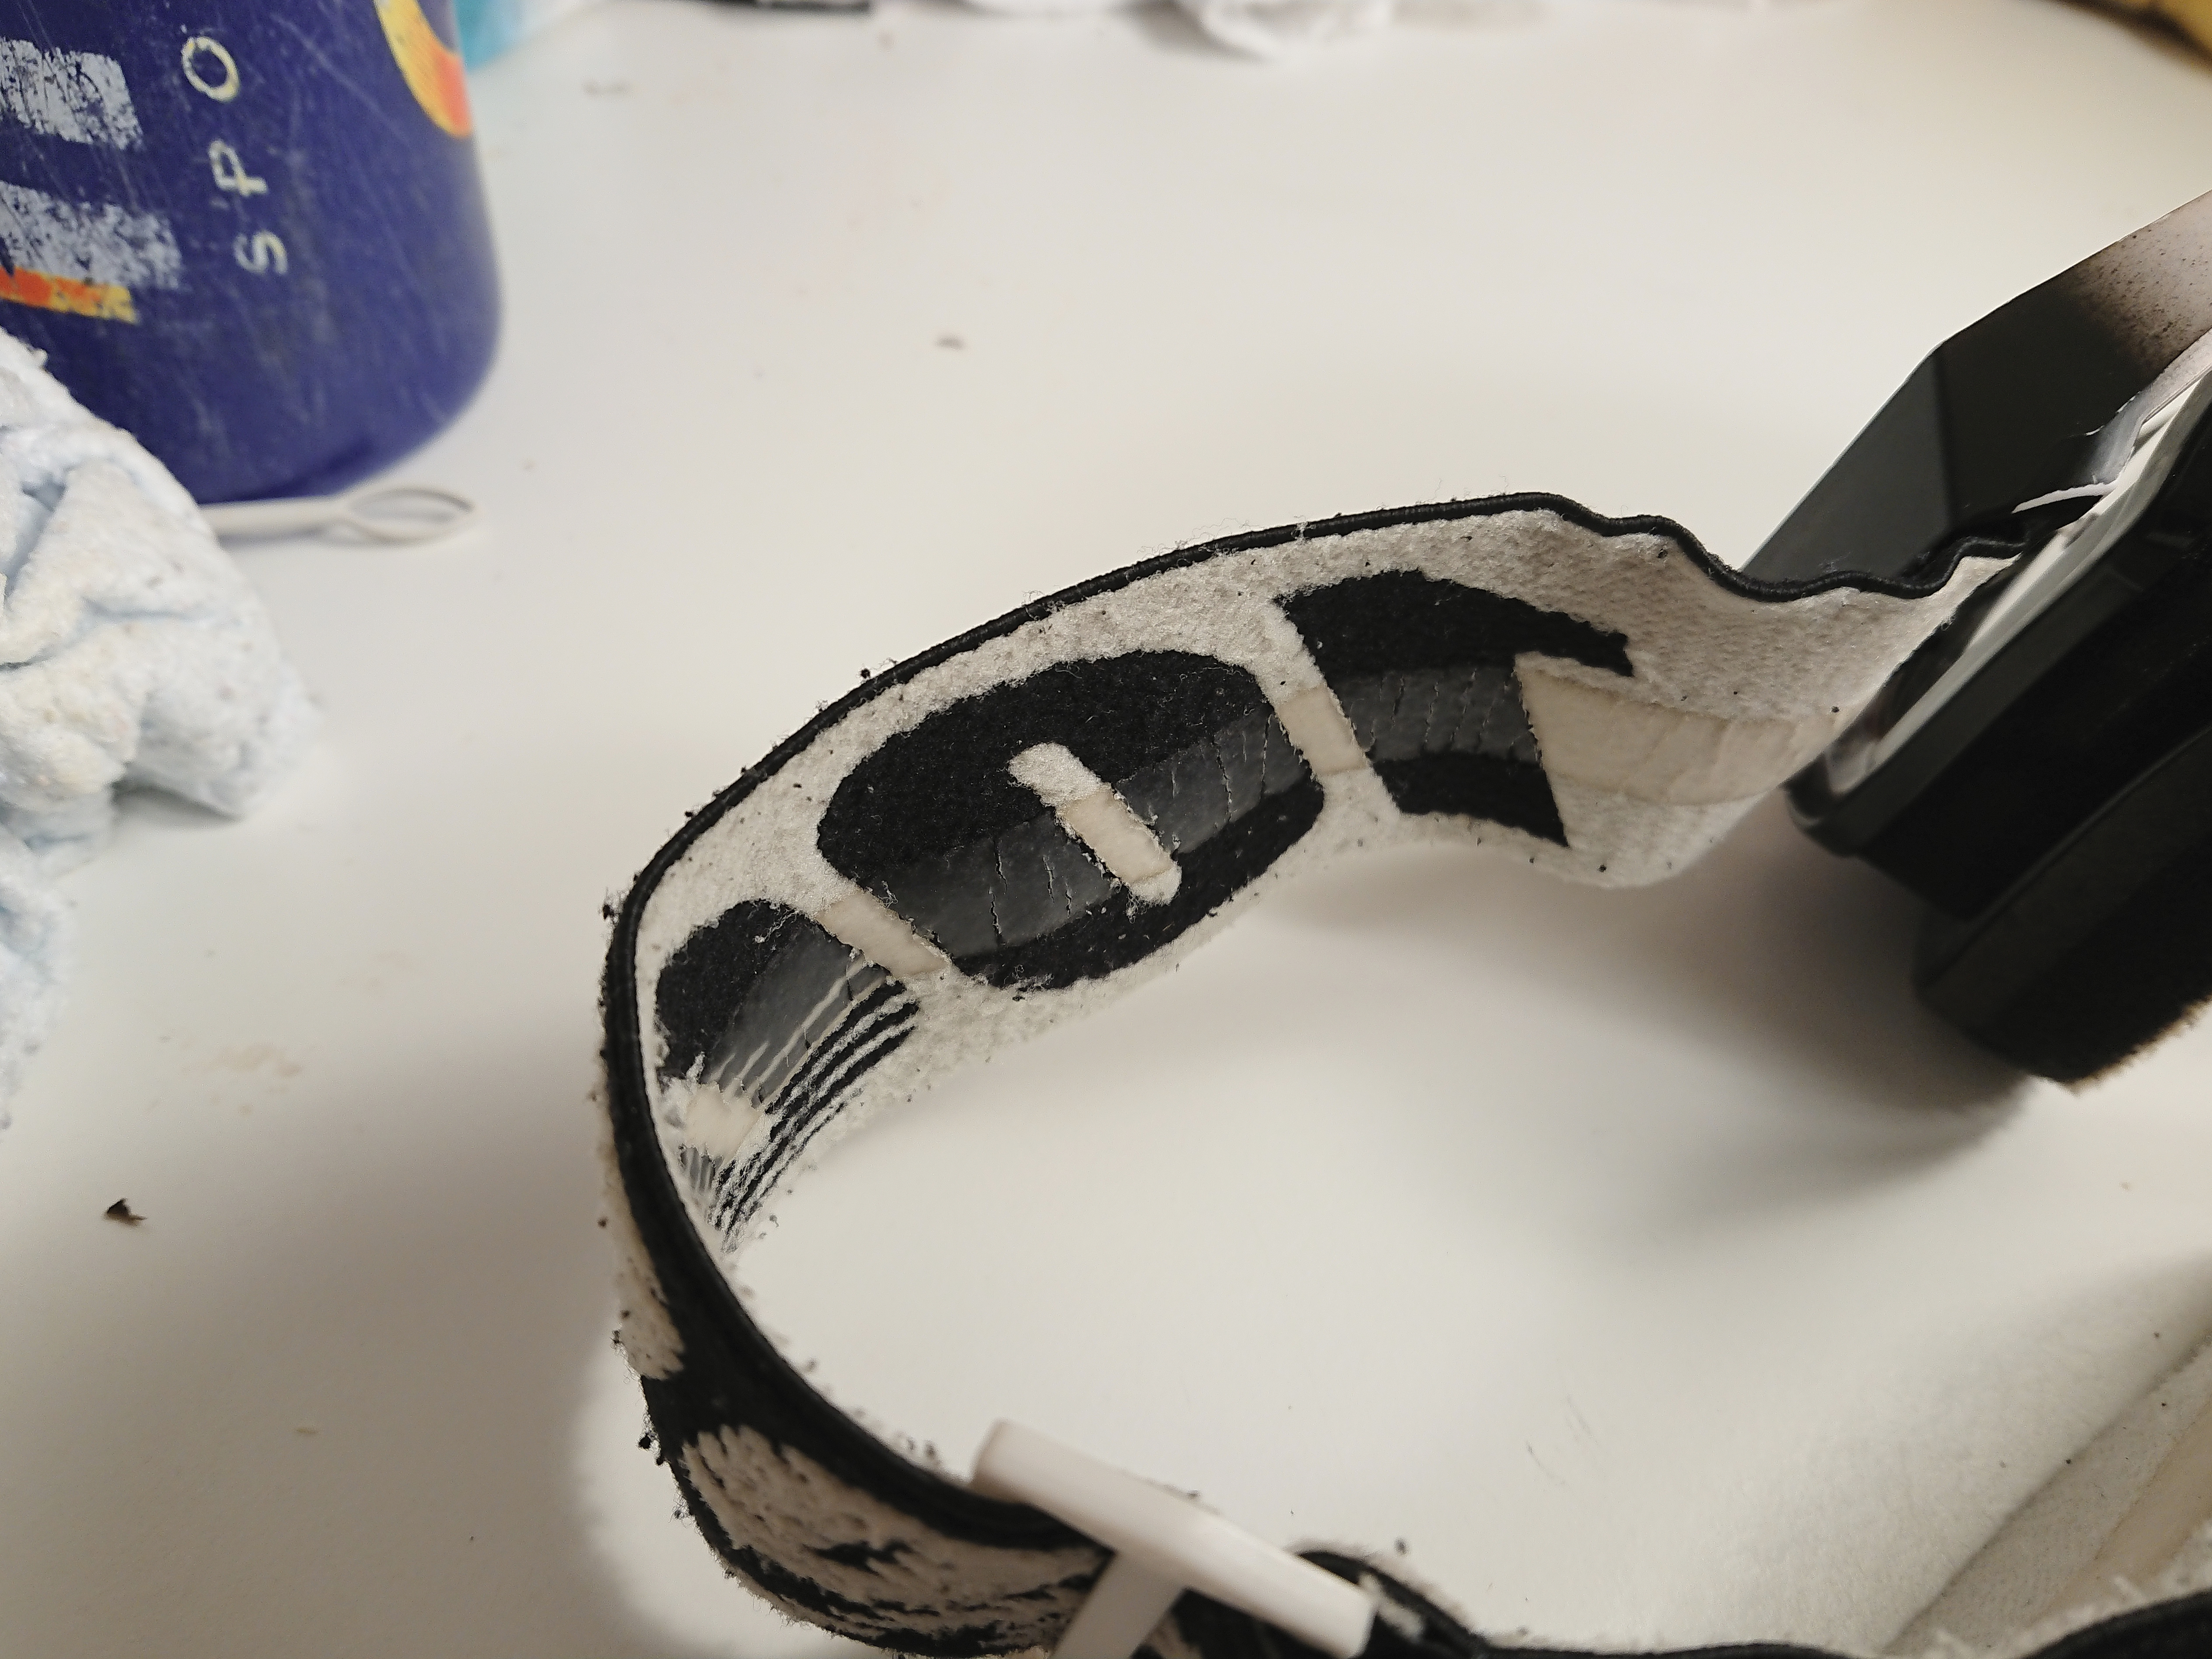 Used to failure updated Review: 100% Racecraft MX Goggles – mtbboy1993